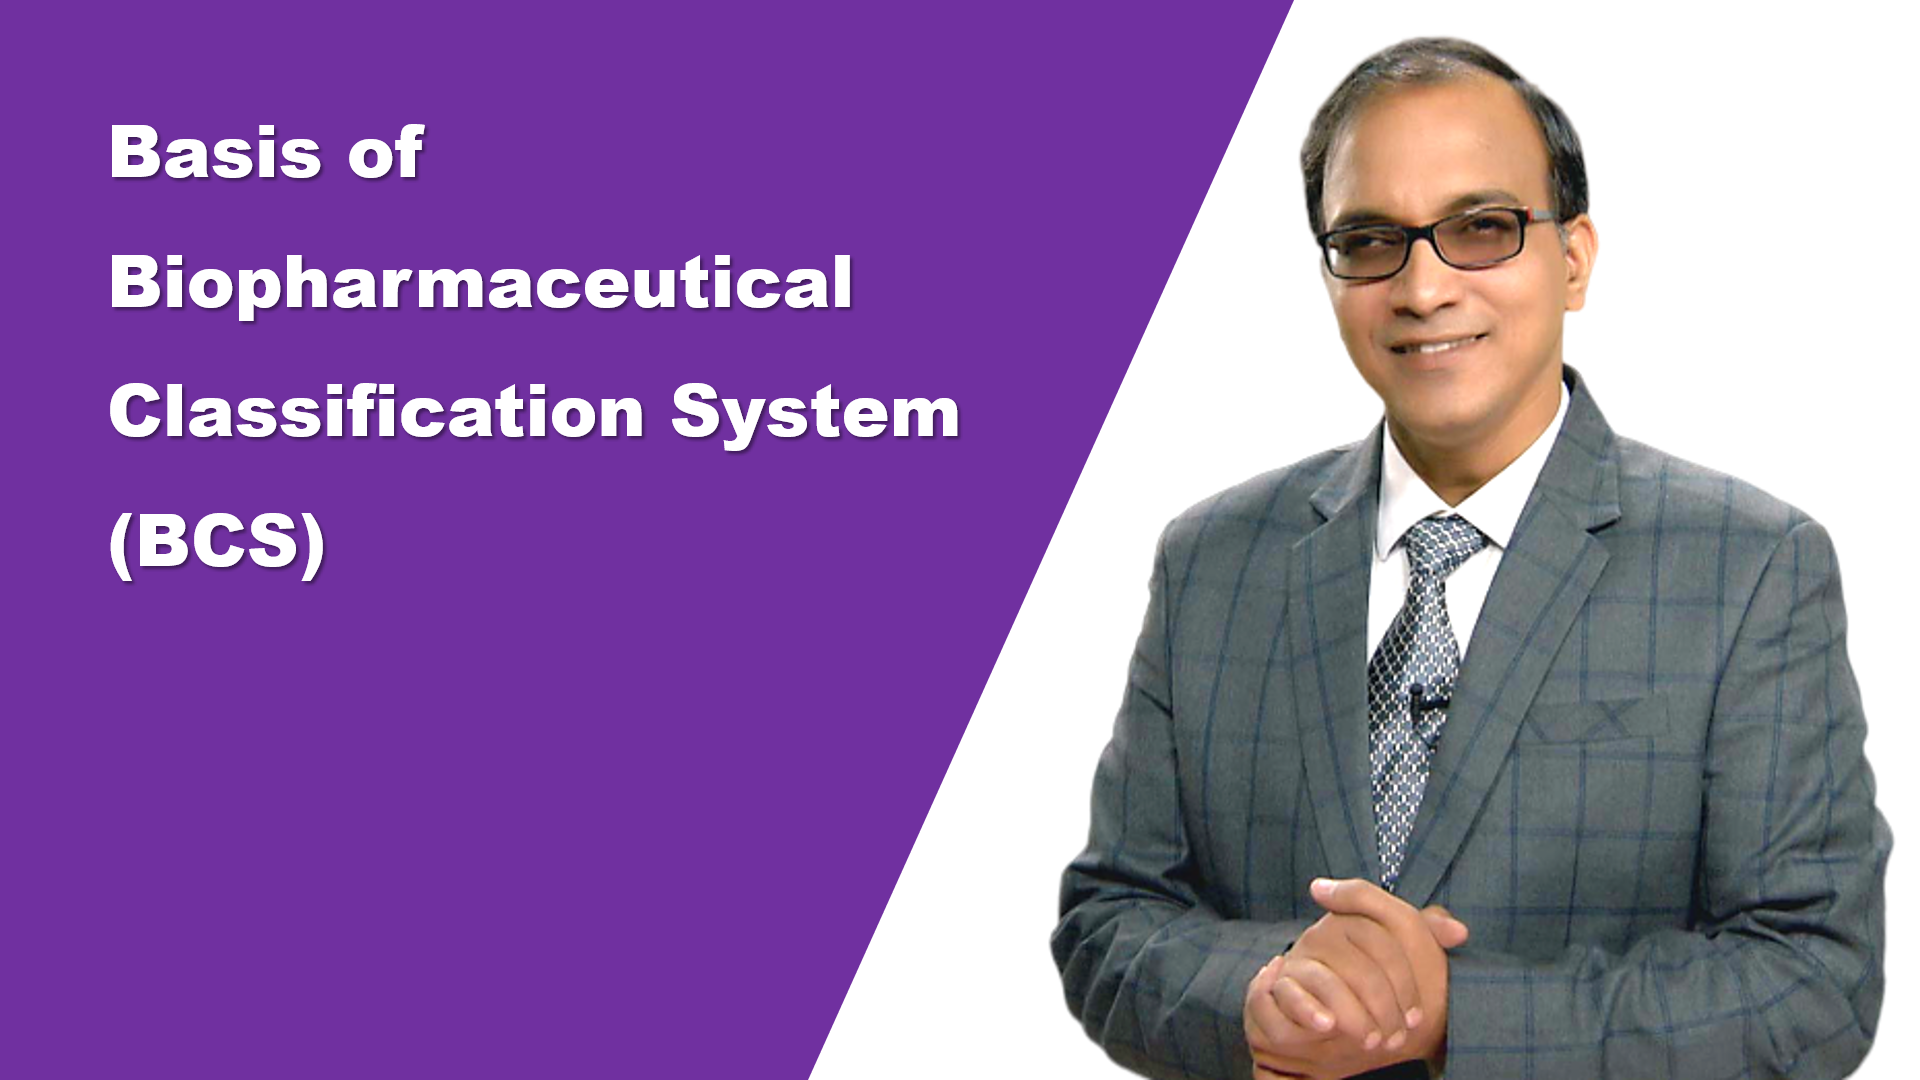 Basis of Biopharmaceutical Classification System (BCS) & its importance